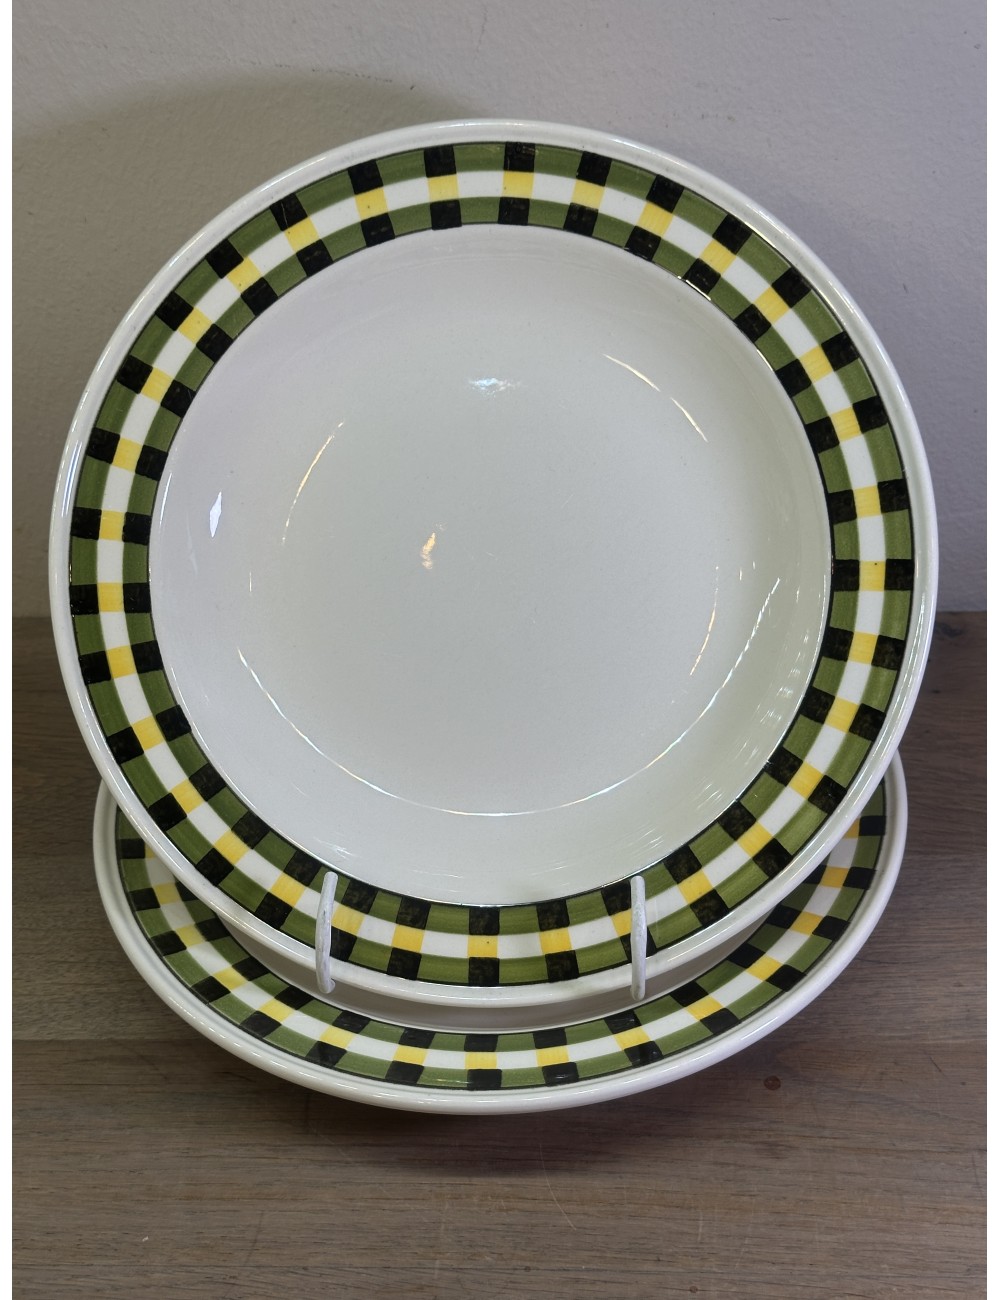 Deep plate / Soup plate / Pasta plate - Villeroy & Boch - décor GLASGOW executed in green/yellow/black